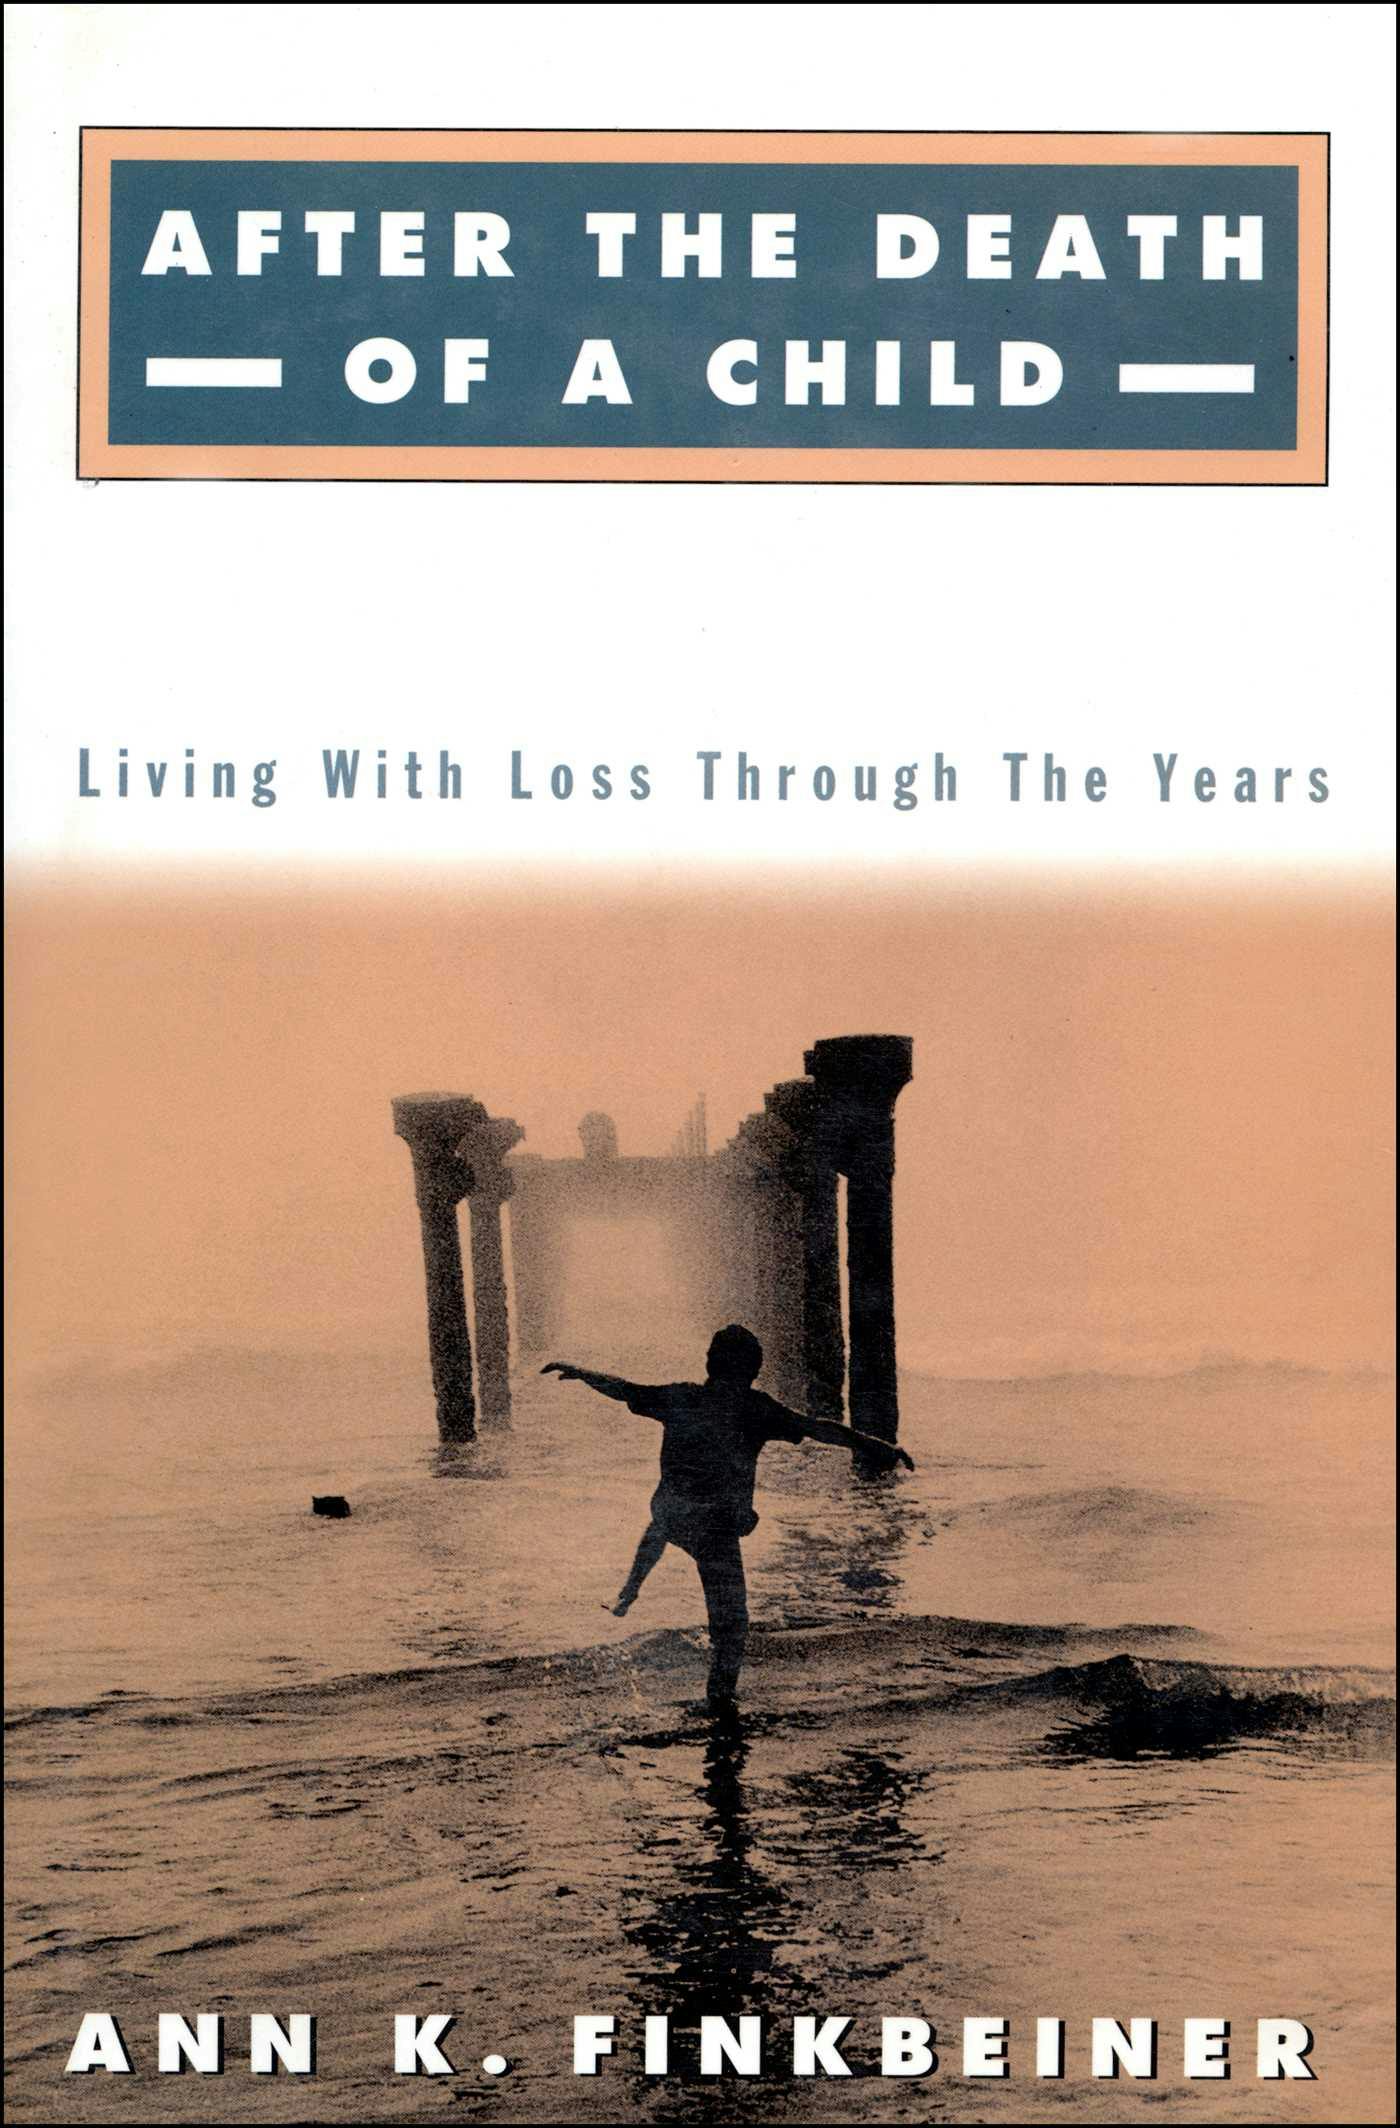 After the Death of a Child: Living with the Loss Through the Years - Ann K. Finkbeiner